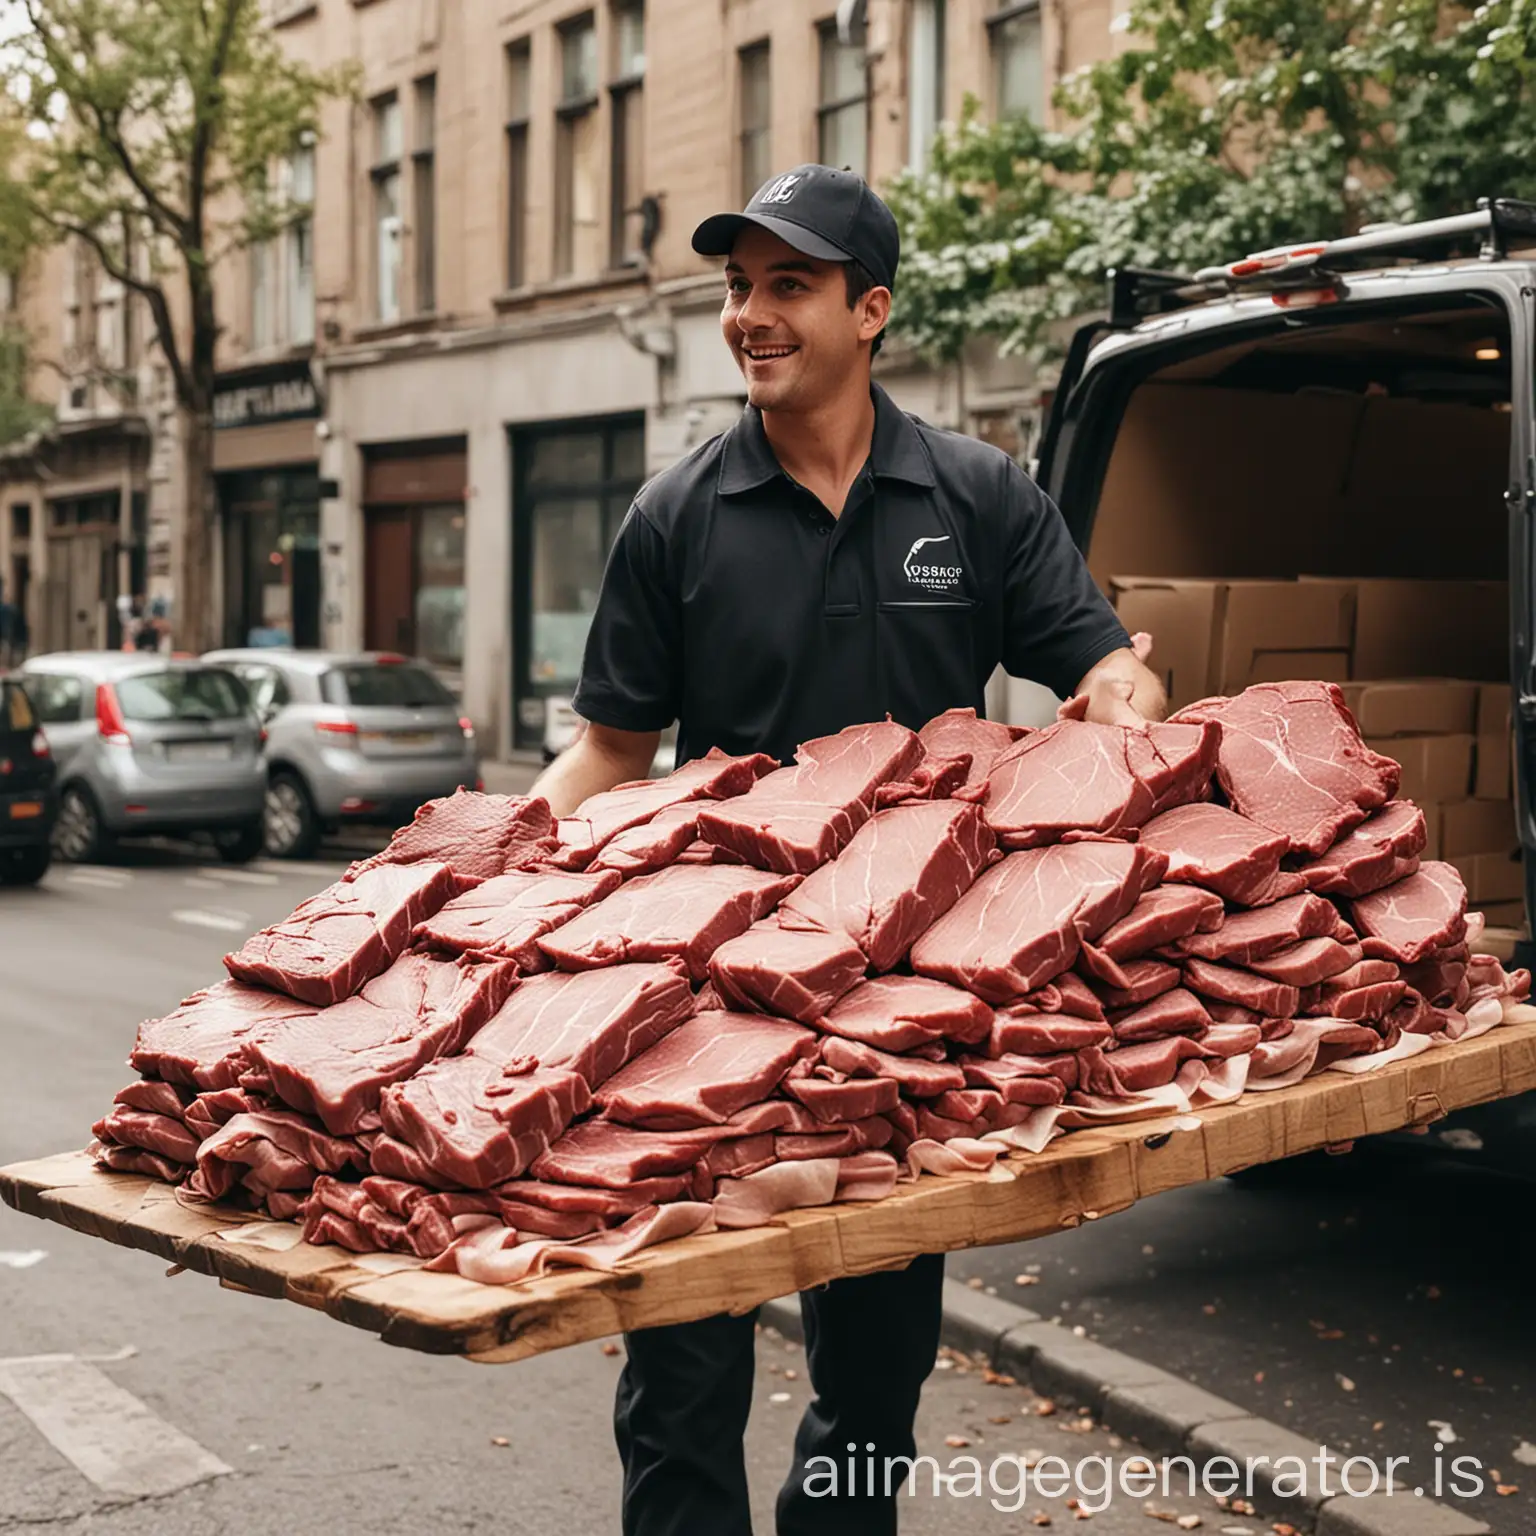 A DELIVERY MAN DELIVERING A BOARD OF MEAT